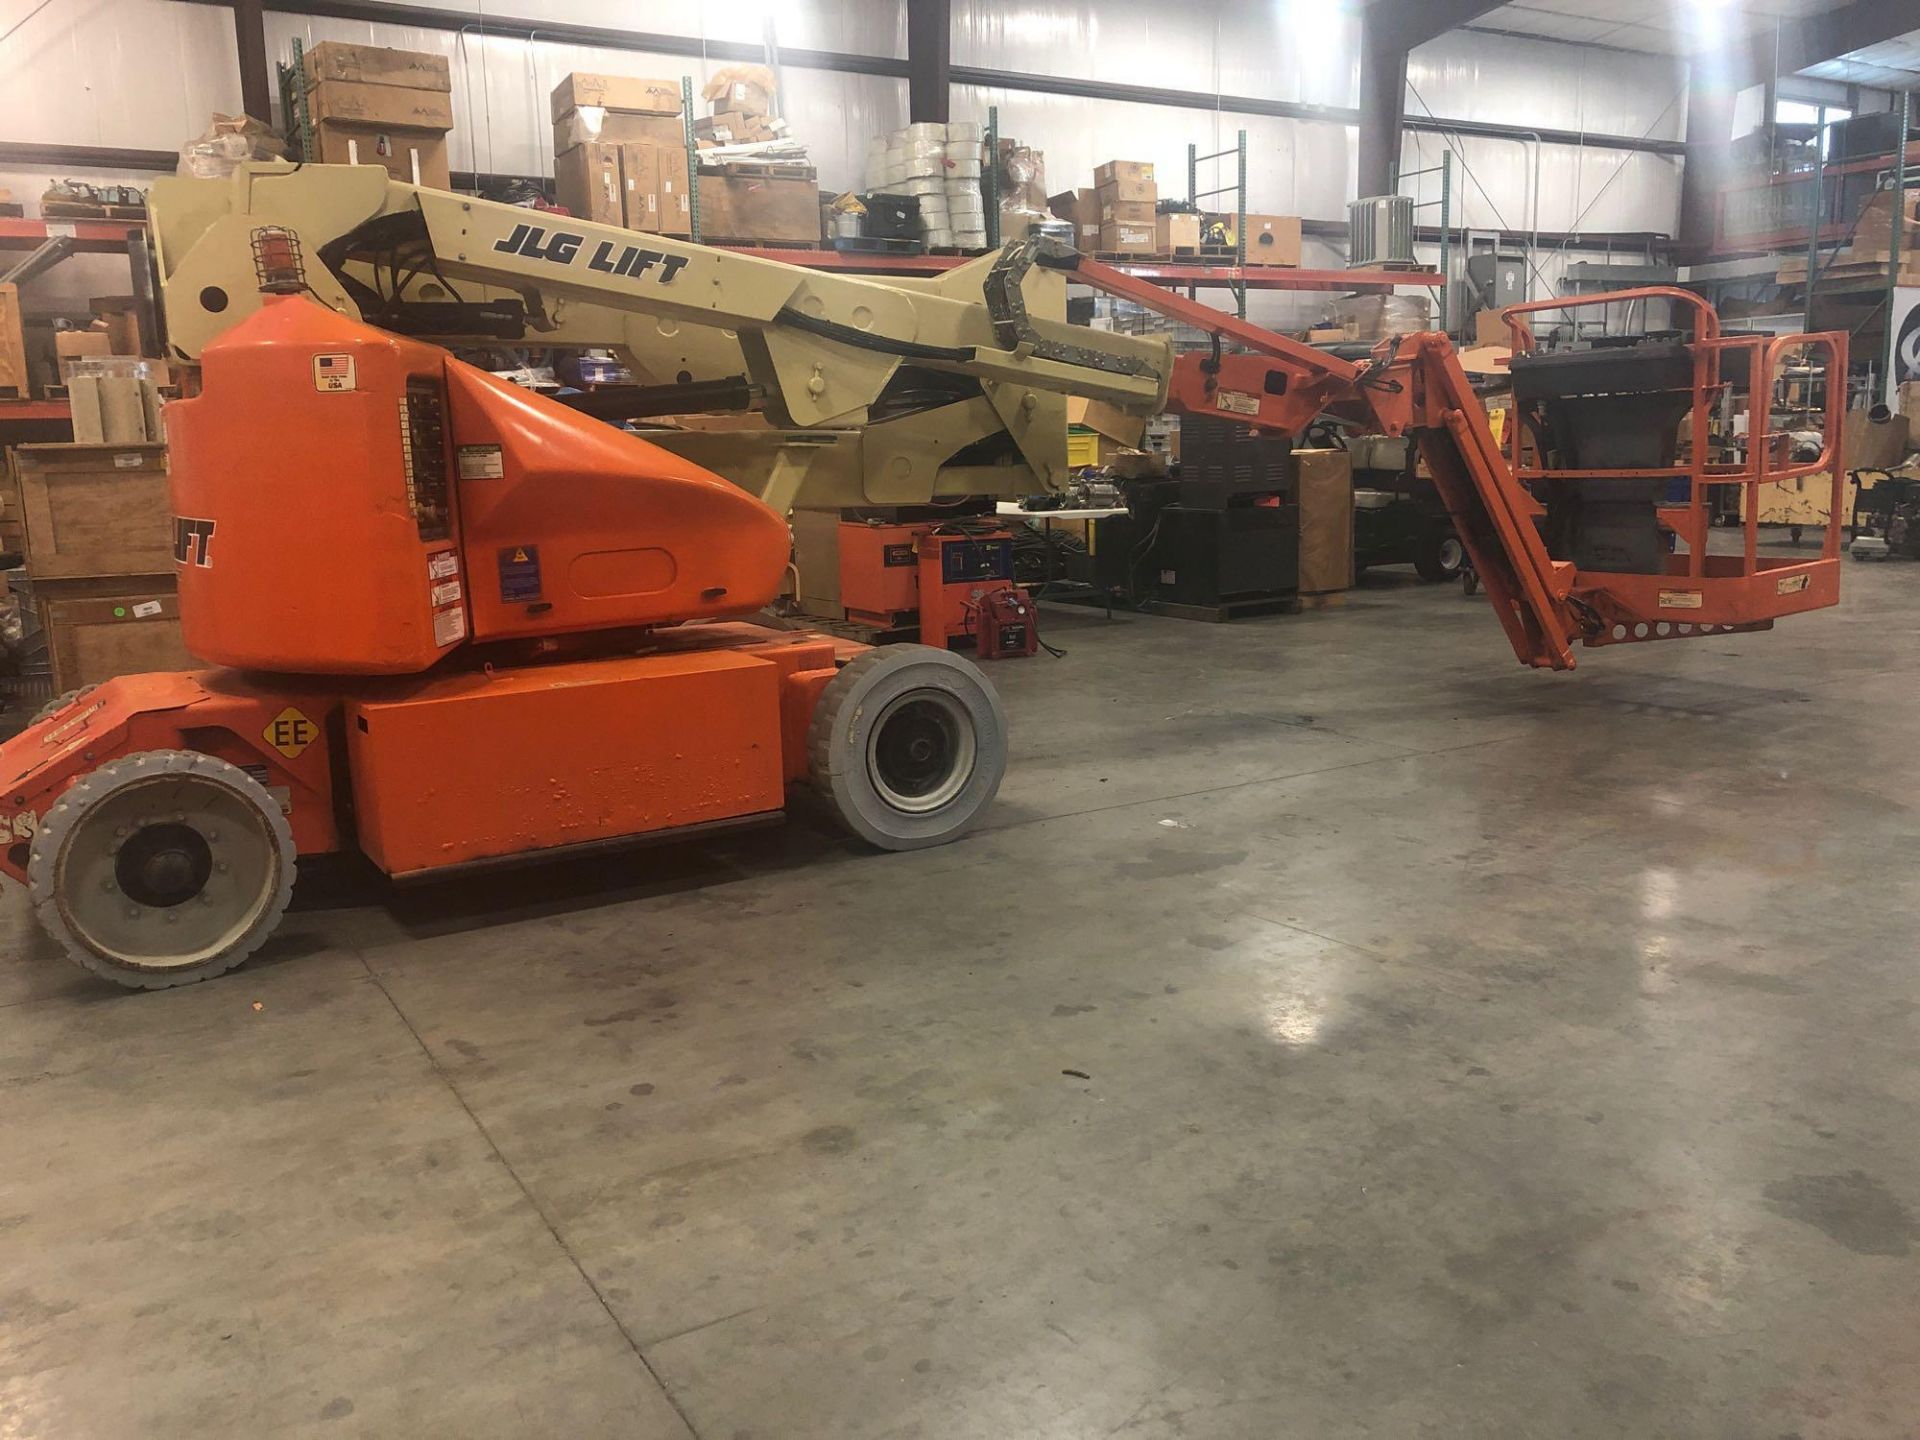 JLG E400AJN ELECTRIC ARTICULATING BOOM LIFT, 40' HEIGHT CAPACITY - Image 2 of 8